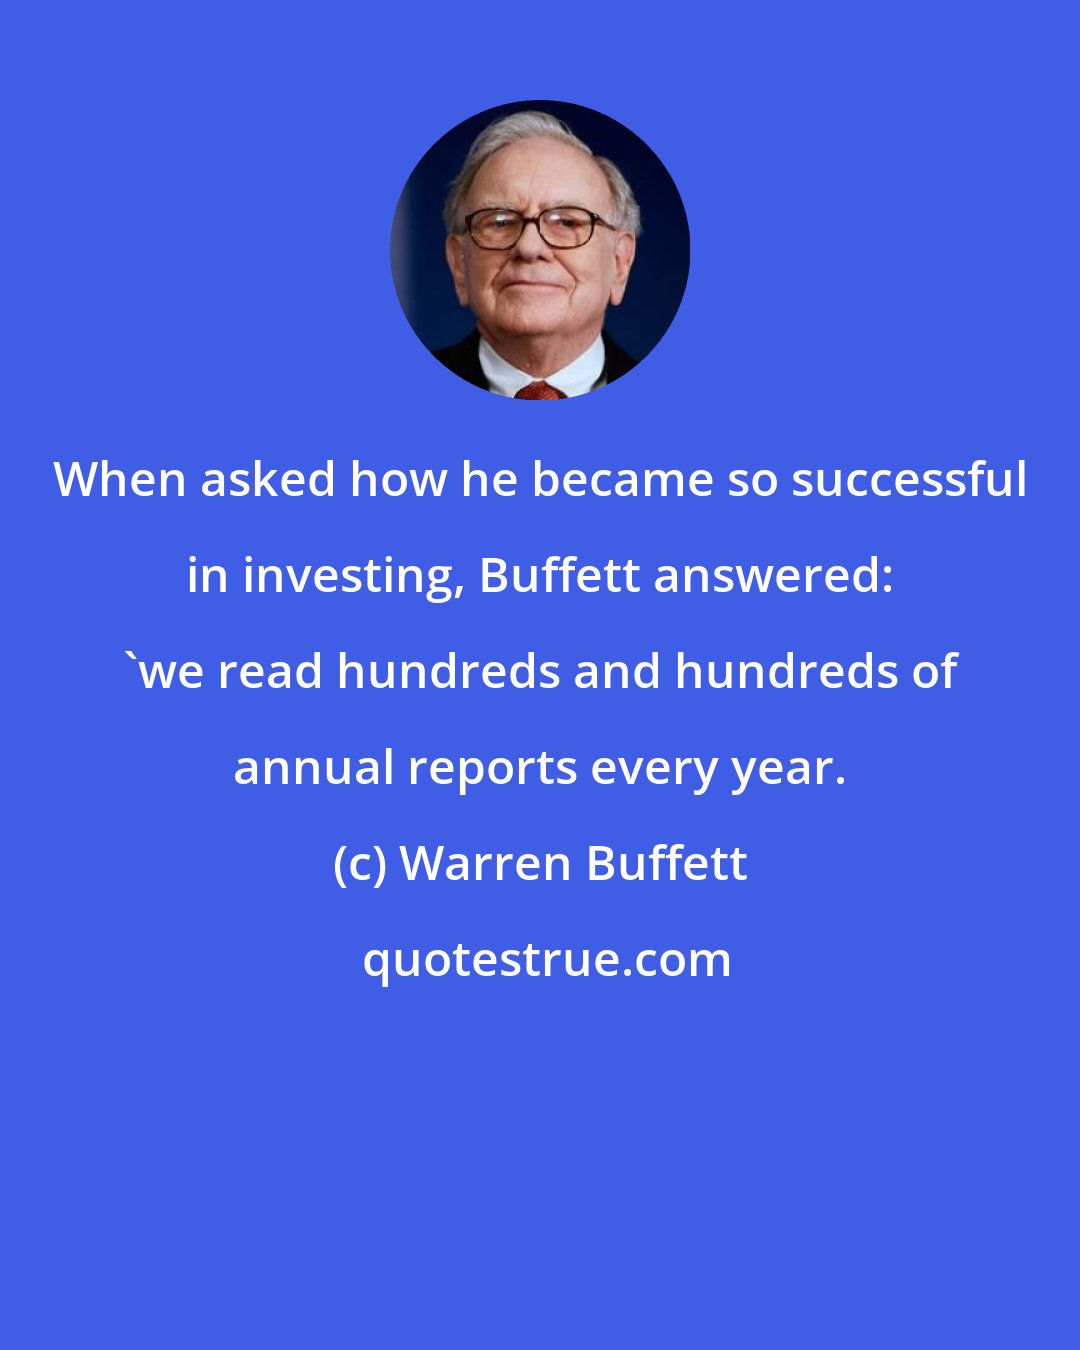 Warren Buffett: When asked how he became so successful in investing, Buffett answered: 'we read hundreds and hundreds of annual reports every year.